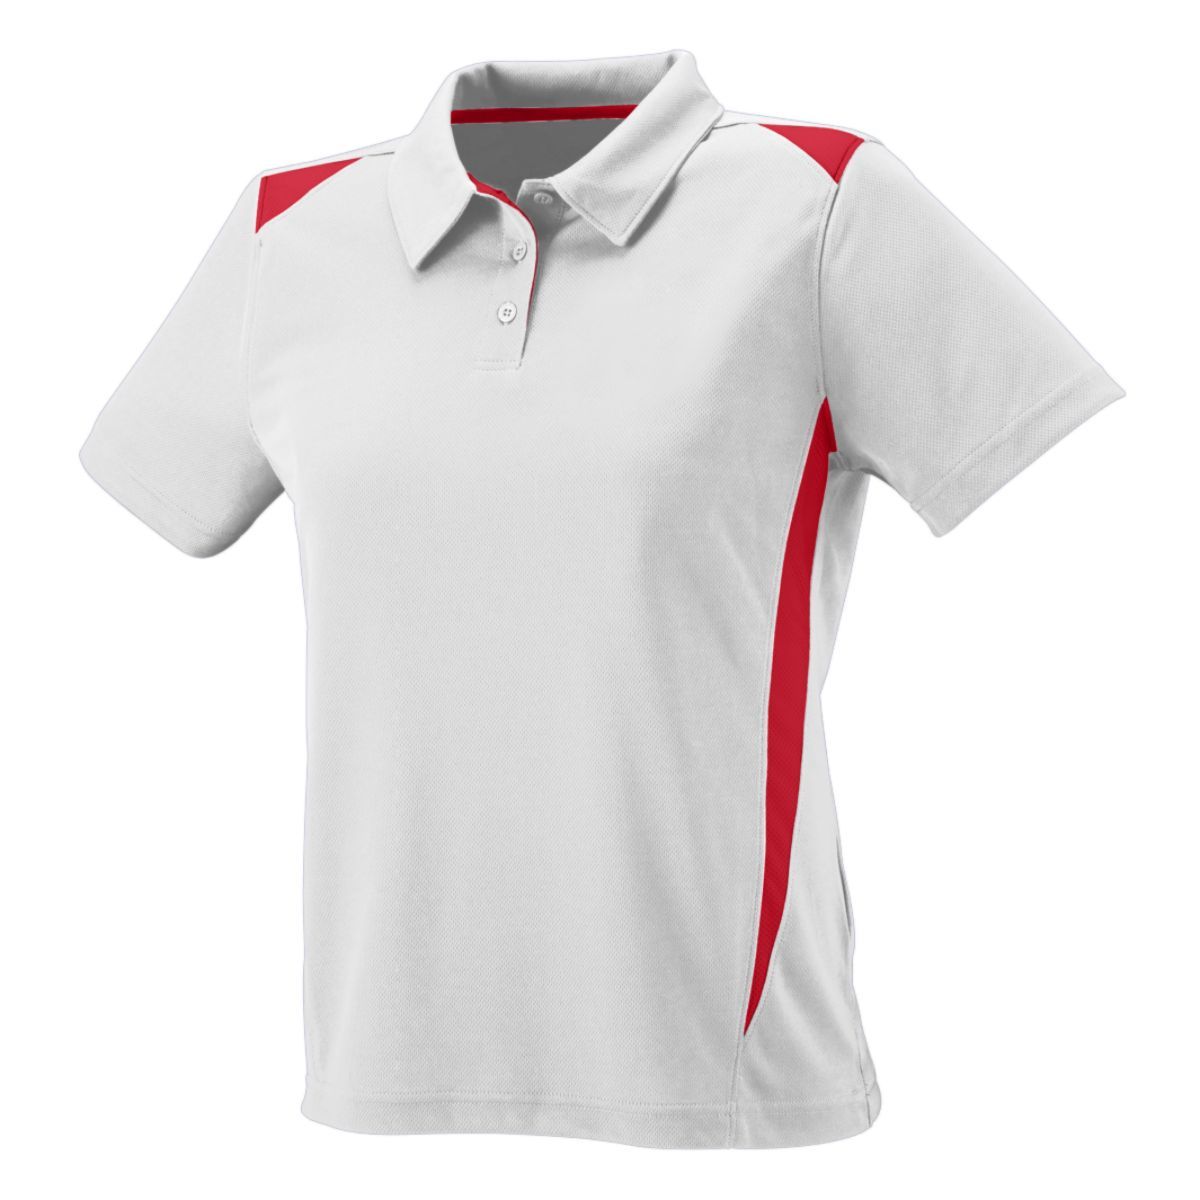 Augusta Sportswear Ladies Premier Polo in White/Red  -Part of the Ladies, Ladies-Polo, Polos, Augusta-Products, Shirts product lines at KanaleyCreations.com